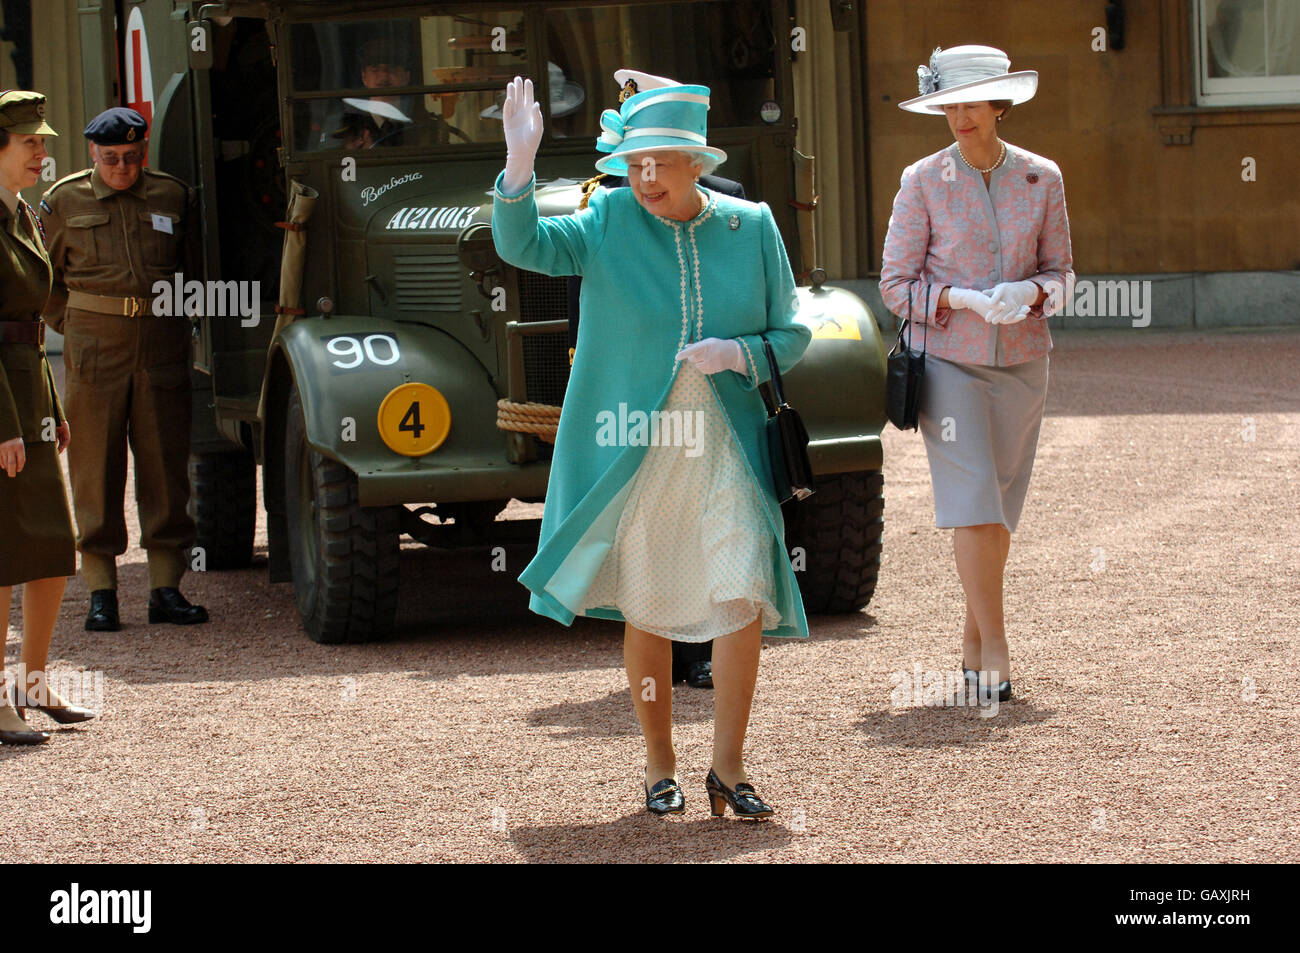 Britain's Queen Elizabeth II, inspects vintage vehicles used by the First Aid Nursing Yeomanry during WWII, which were assembled in the quadrangle of Buckingham Palace, London. Stock Photo